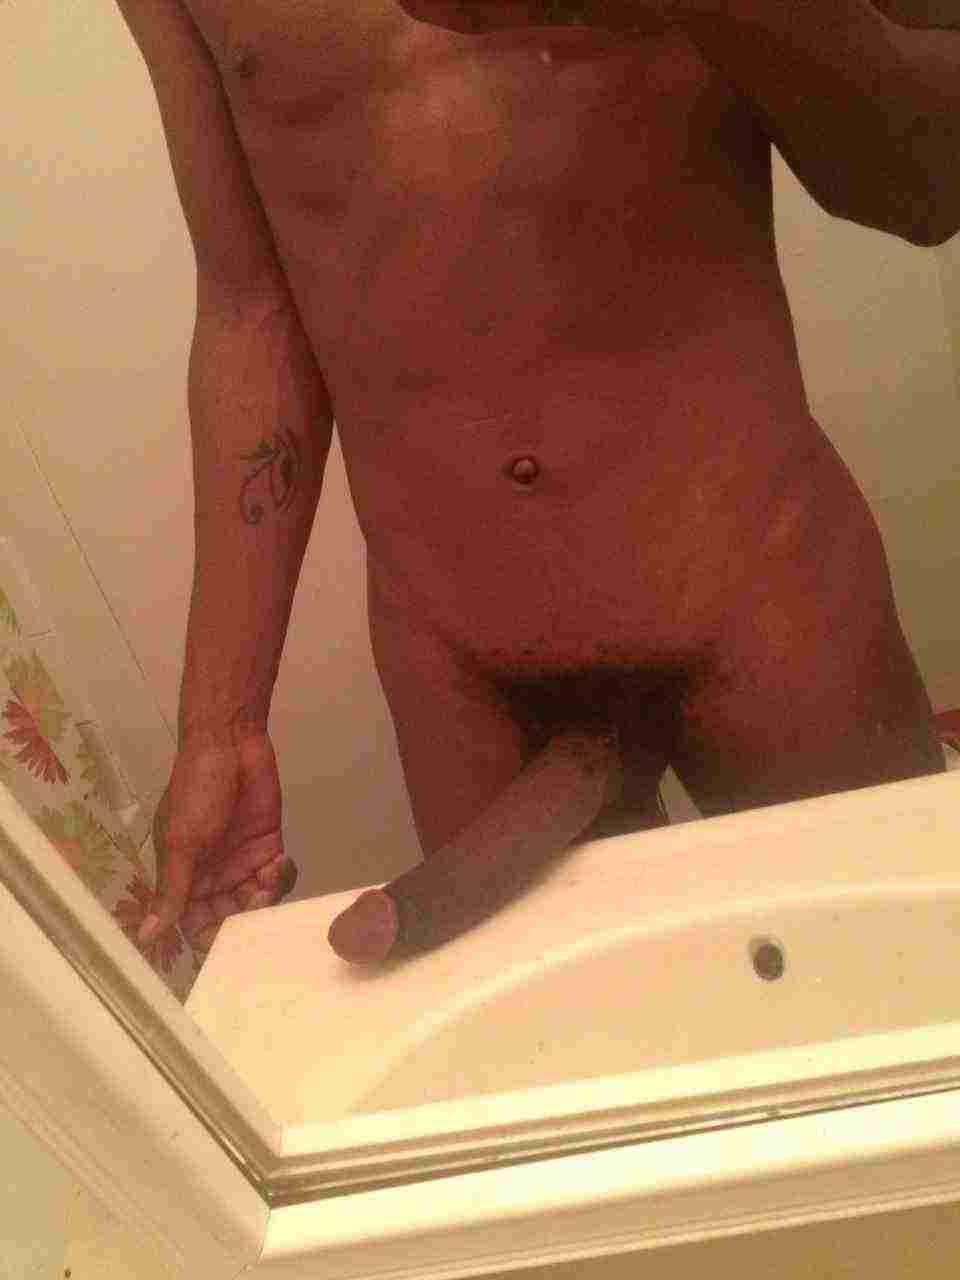 black-dicks-r-us:  HORNY FOR BLACK DICK? There are over 10,000 Black Gay Videos @